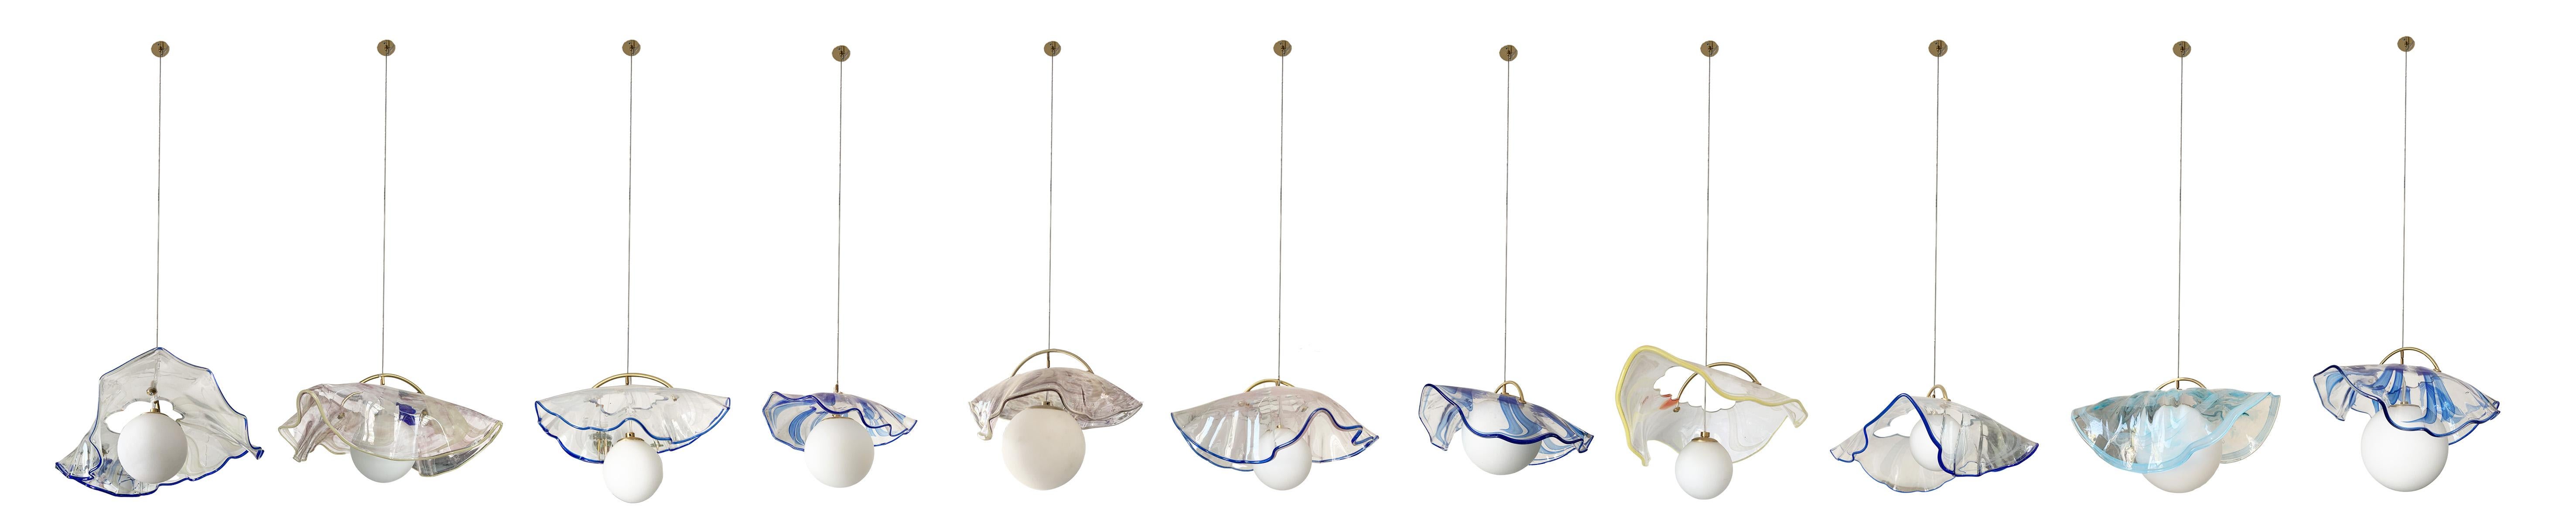 jellyfish pendant lamp by Sema Topaloglu

jellyfish lamps are a collection, the price is for 11 items.

This product is hand-crafted therefore each production is unique and might not be exactly the same as the visual.

 lighting was part of